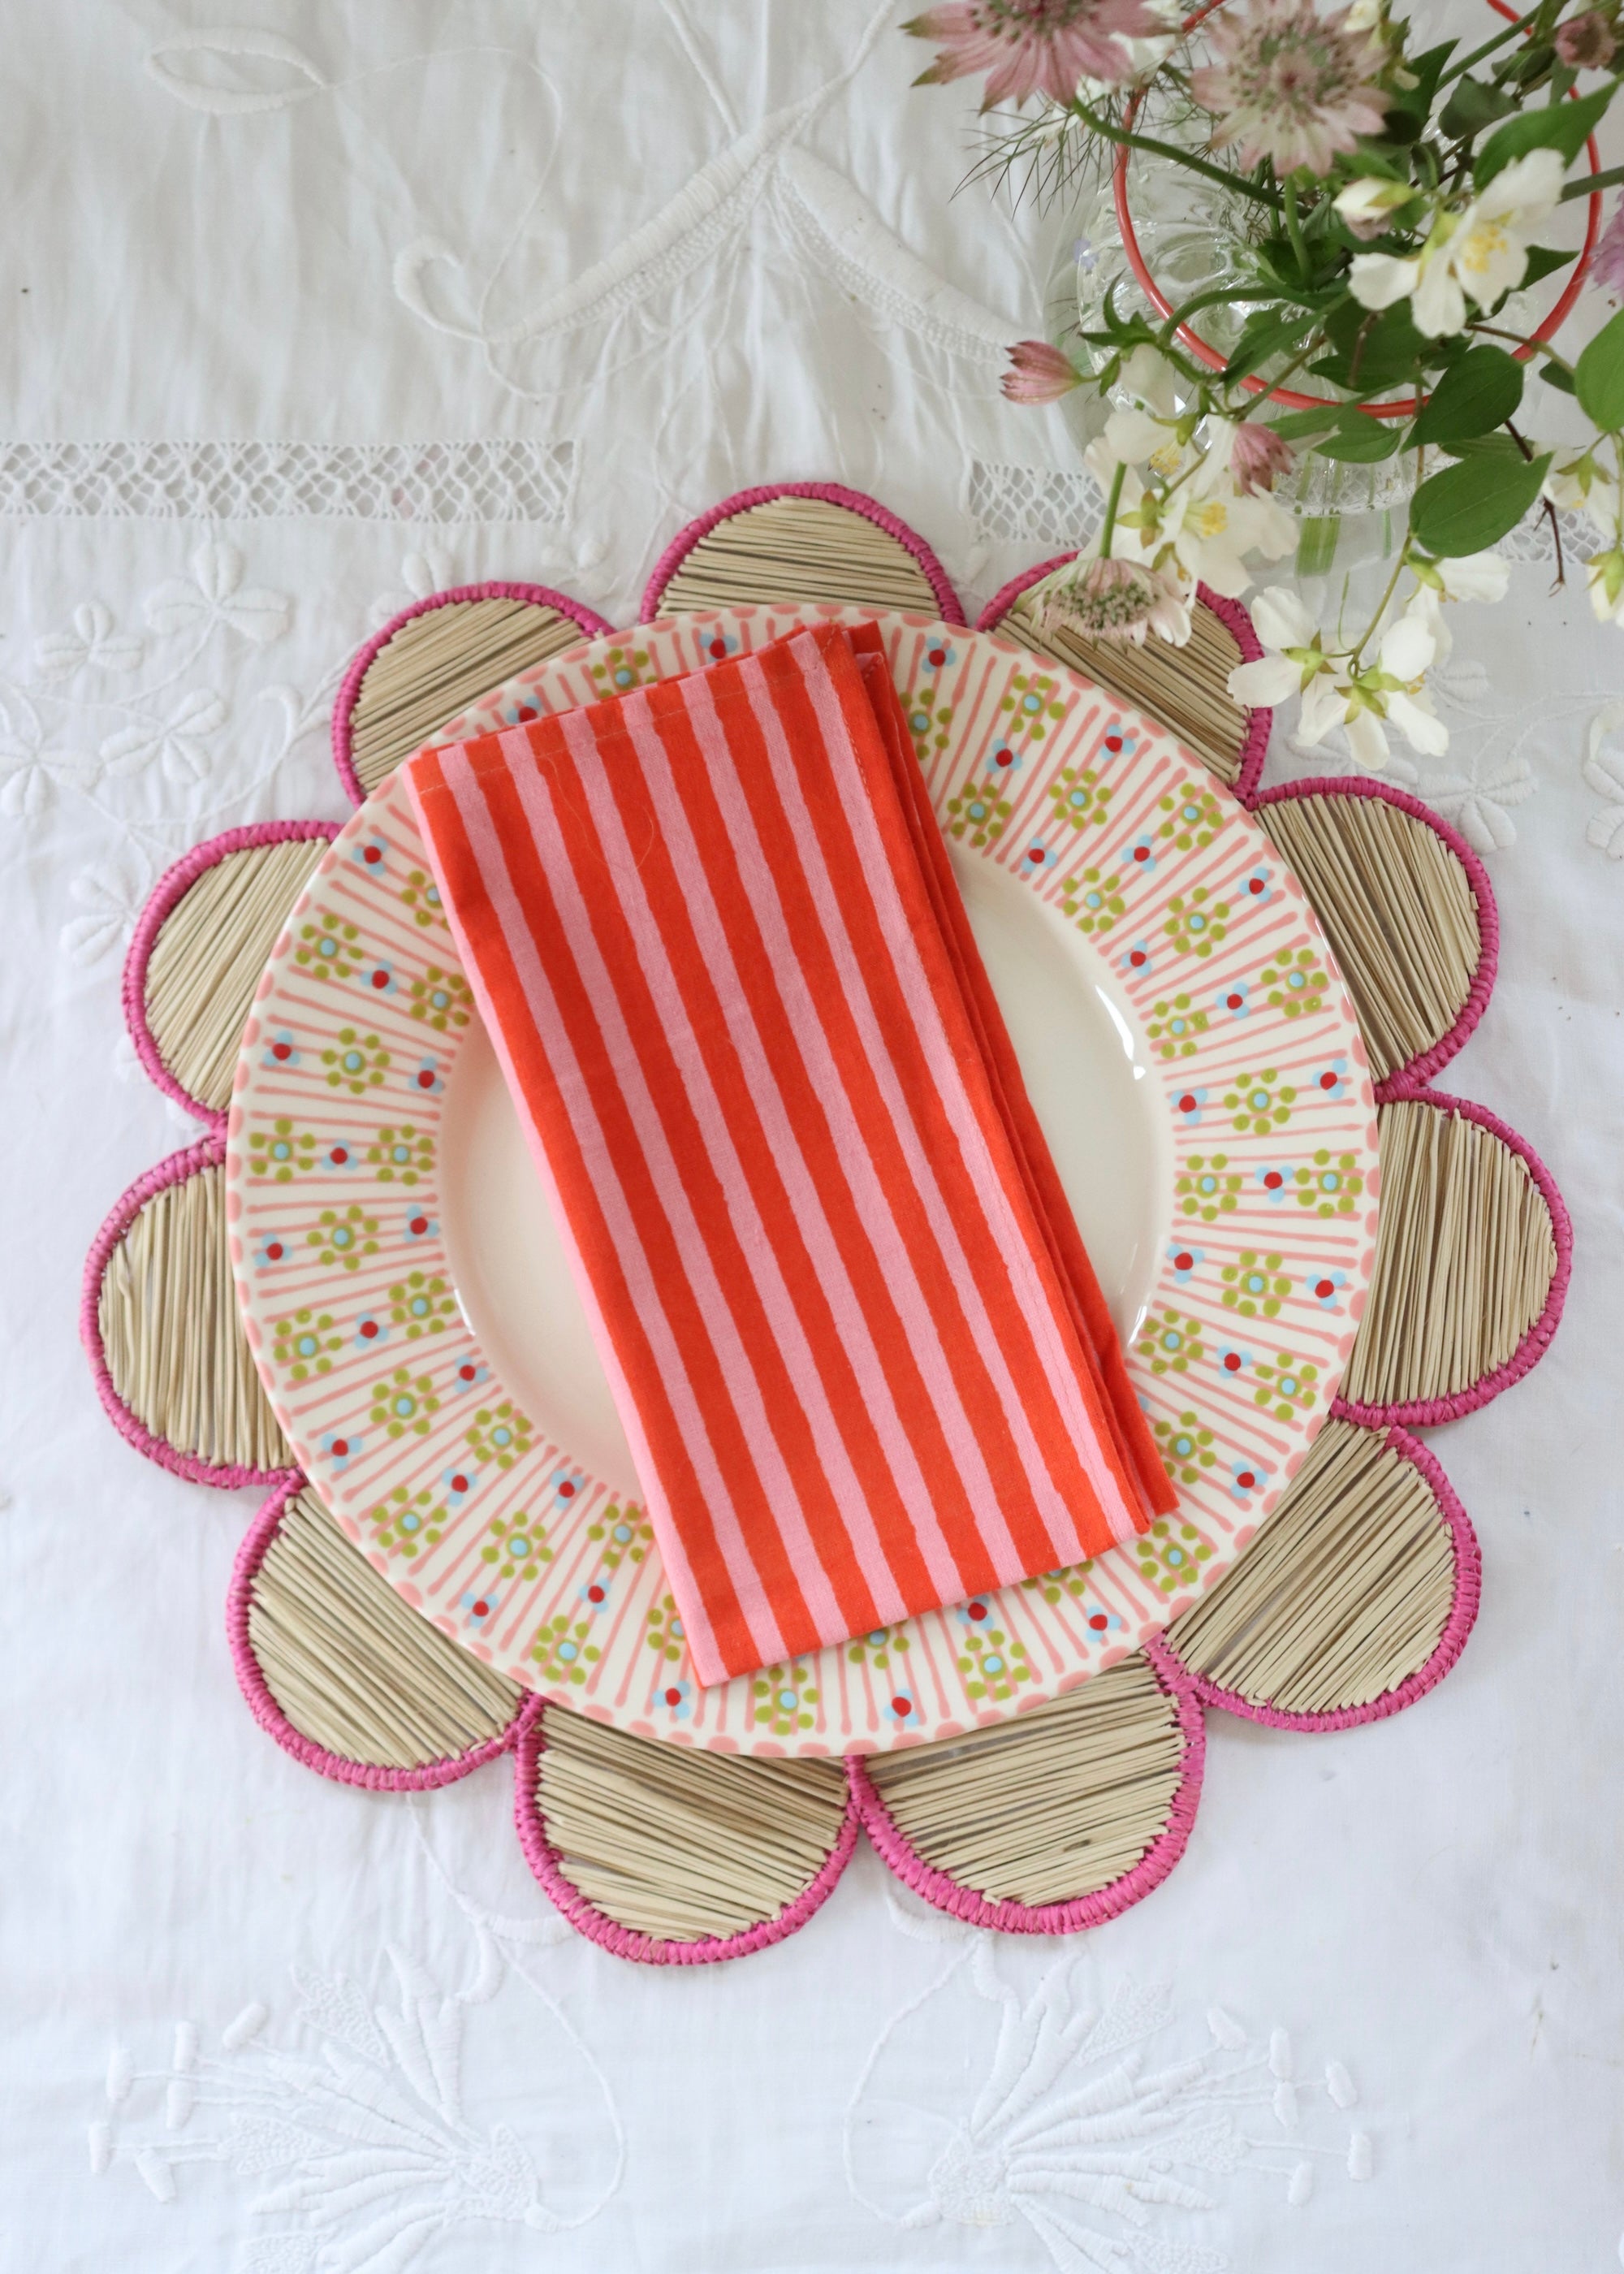 NEW Set Of 4 Napkins - Pink and Red Stripe